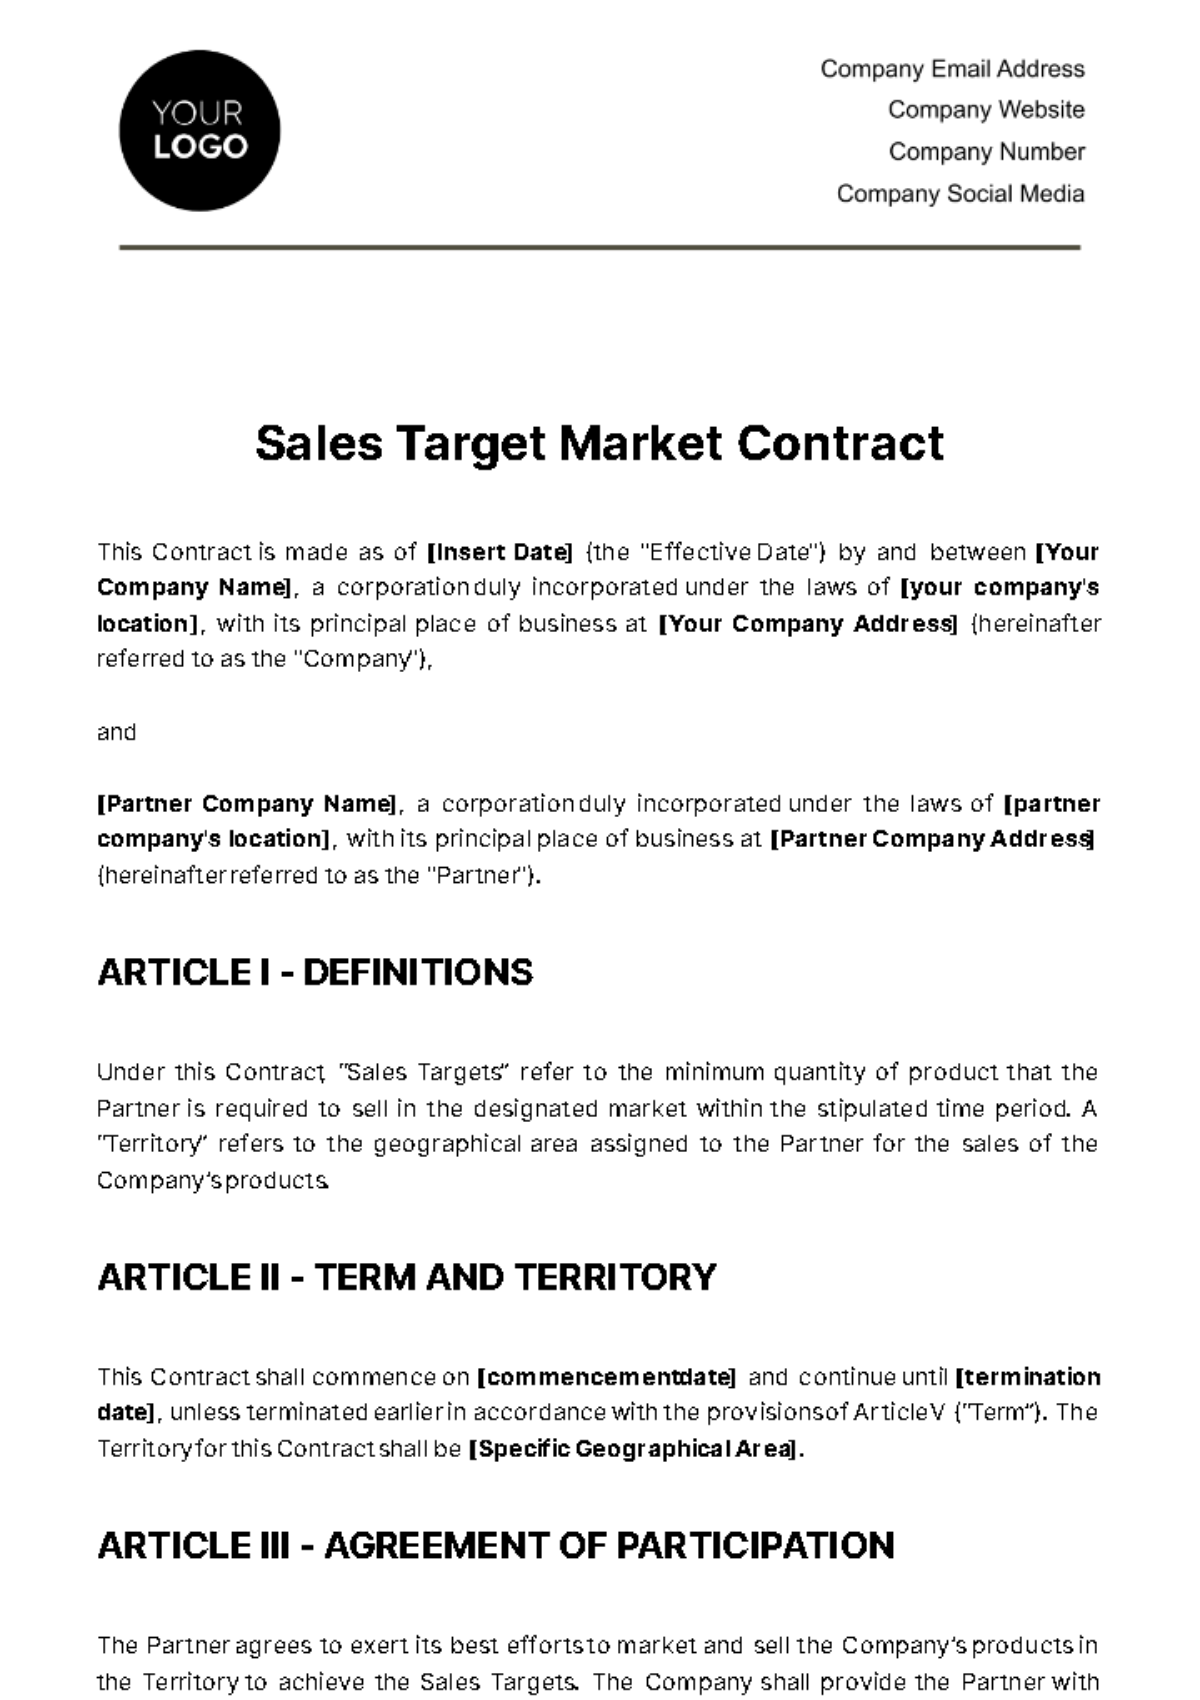 Sales Target Market Contract Template